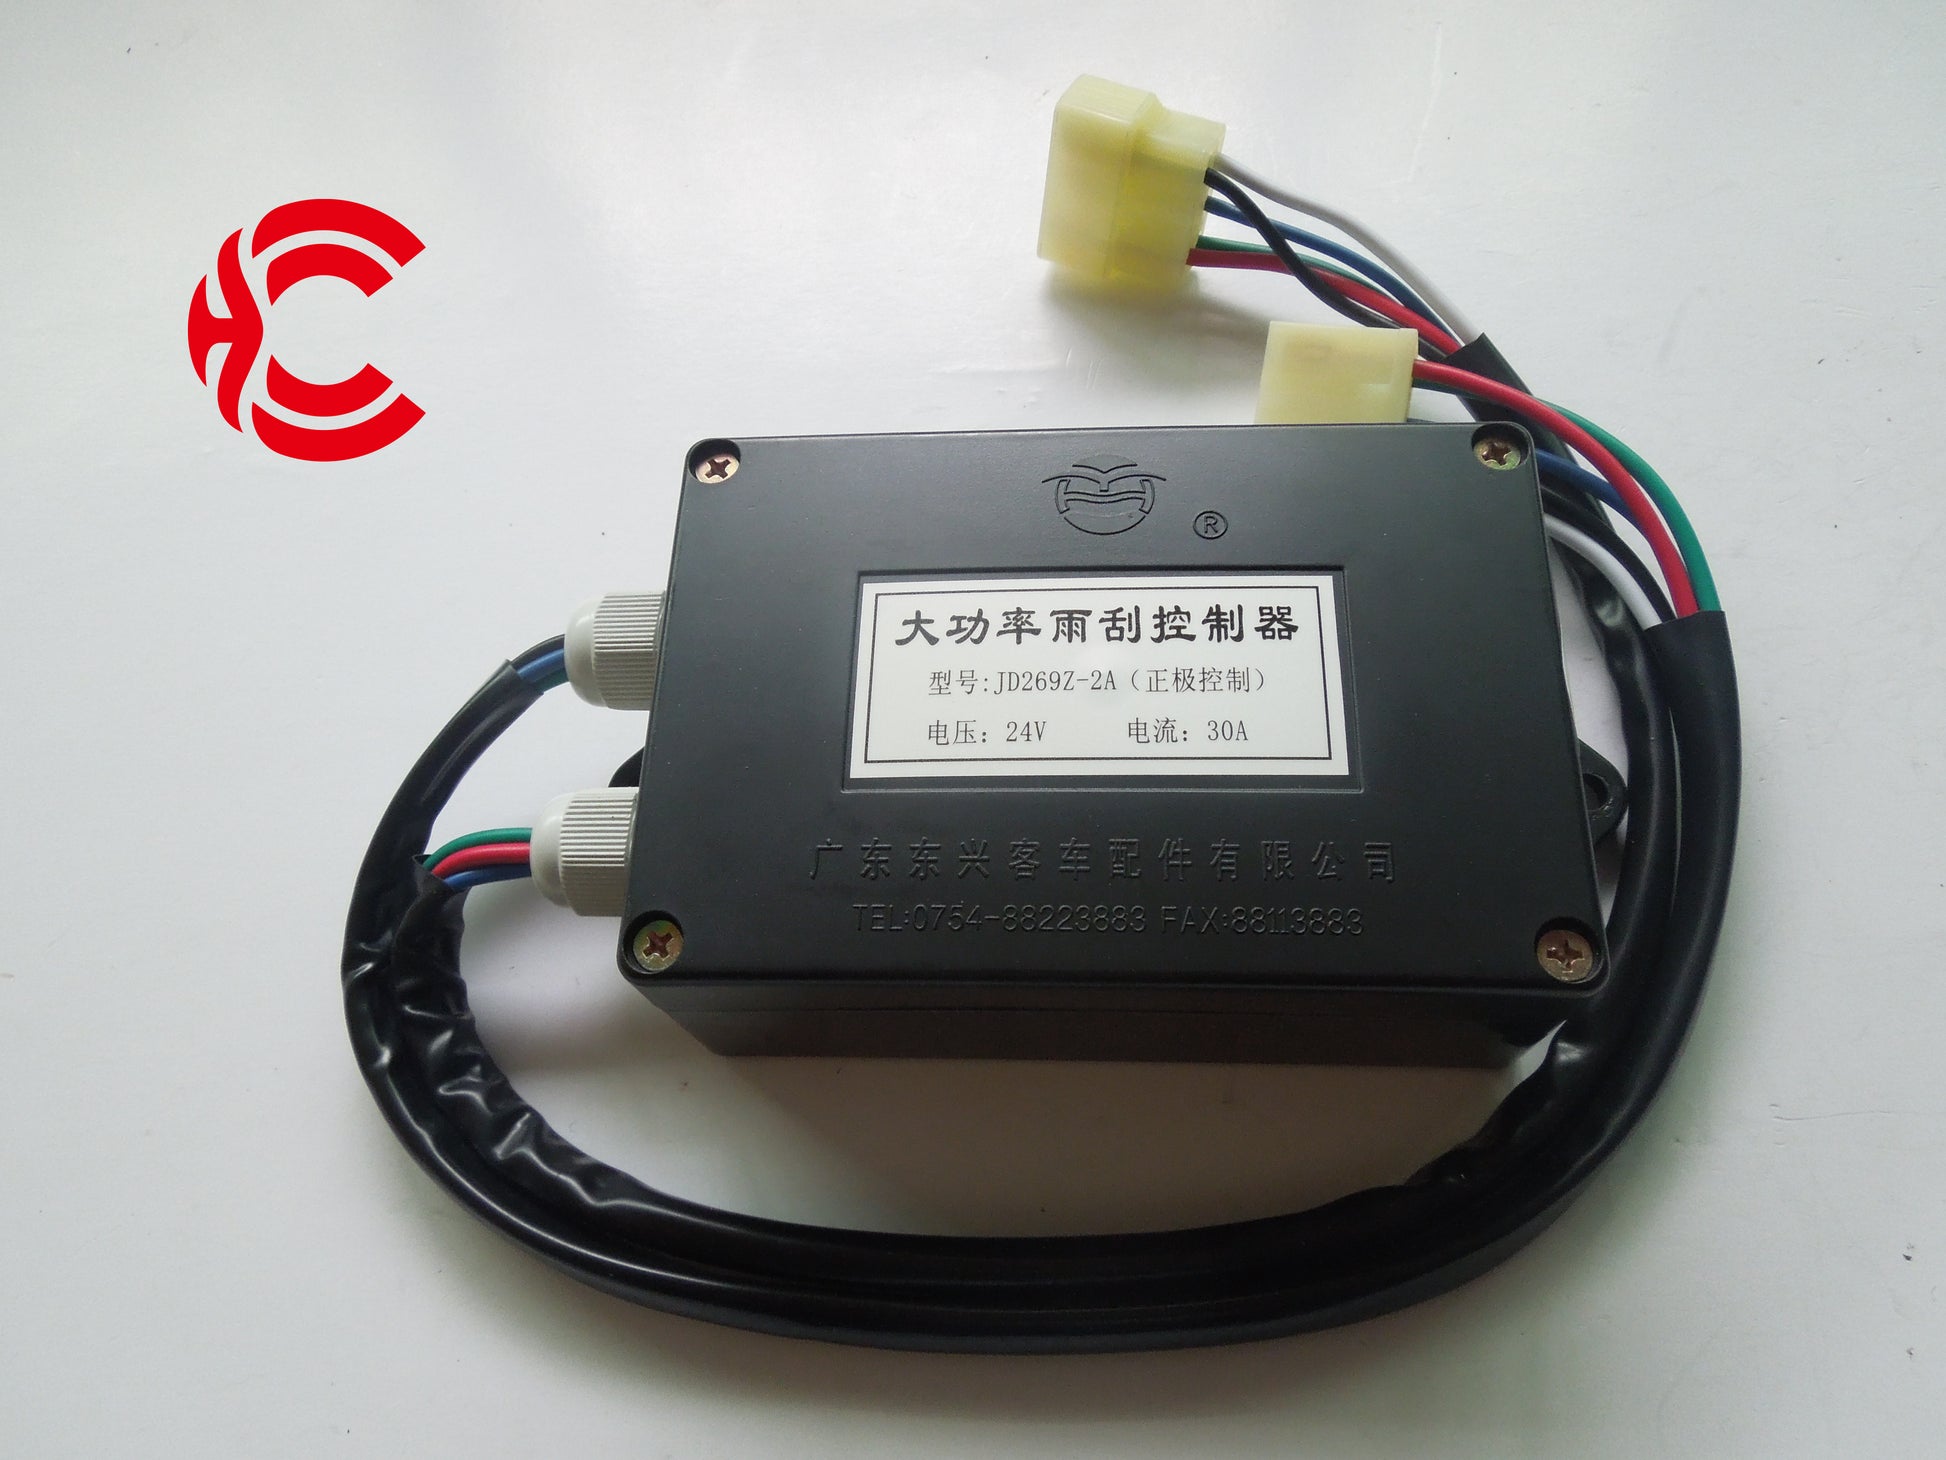 OEM: JD269Z-2A Positive ControlMaterial: ABS Color: black Origin: Made in ChinaWeight: 150gPacking List: 1* Wiper Intermittent Relay More ServiceWe can provide OEM Manufacturing serviceWe can Be your one-step solution for Auto PartsWe can provide technical scheme for you Feel Free to Contact Us, We will get back to you as soon as possible.